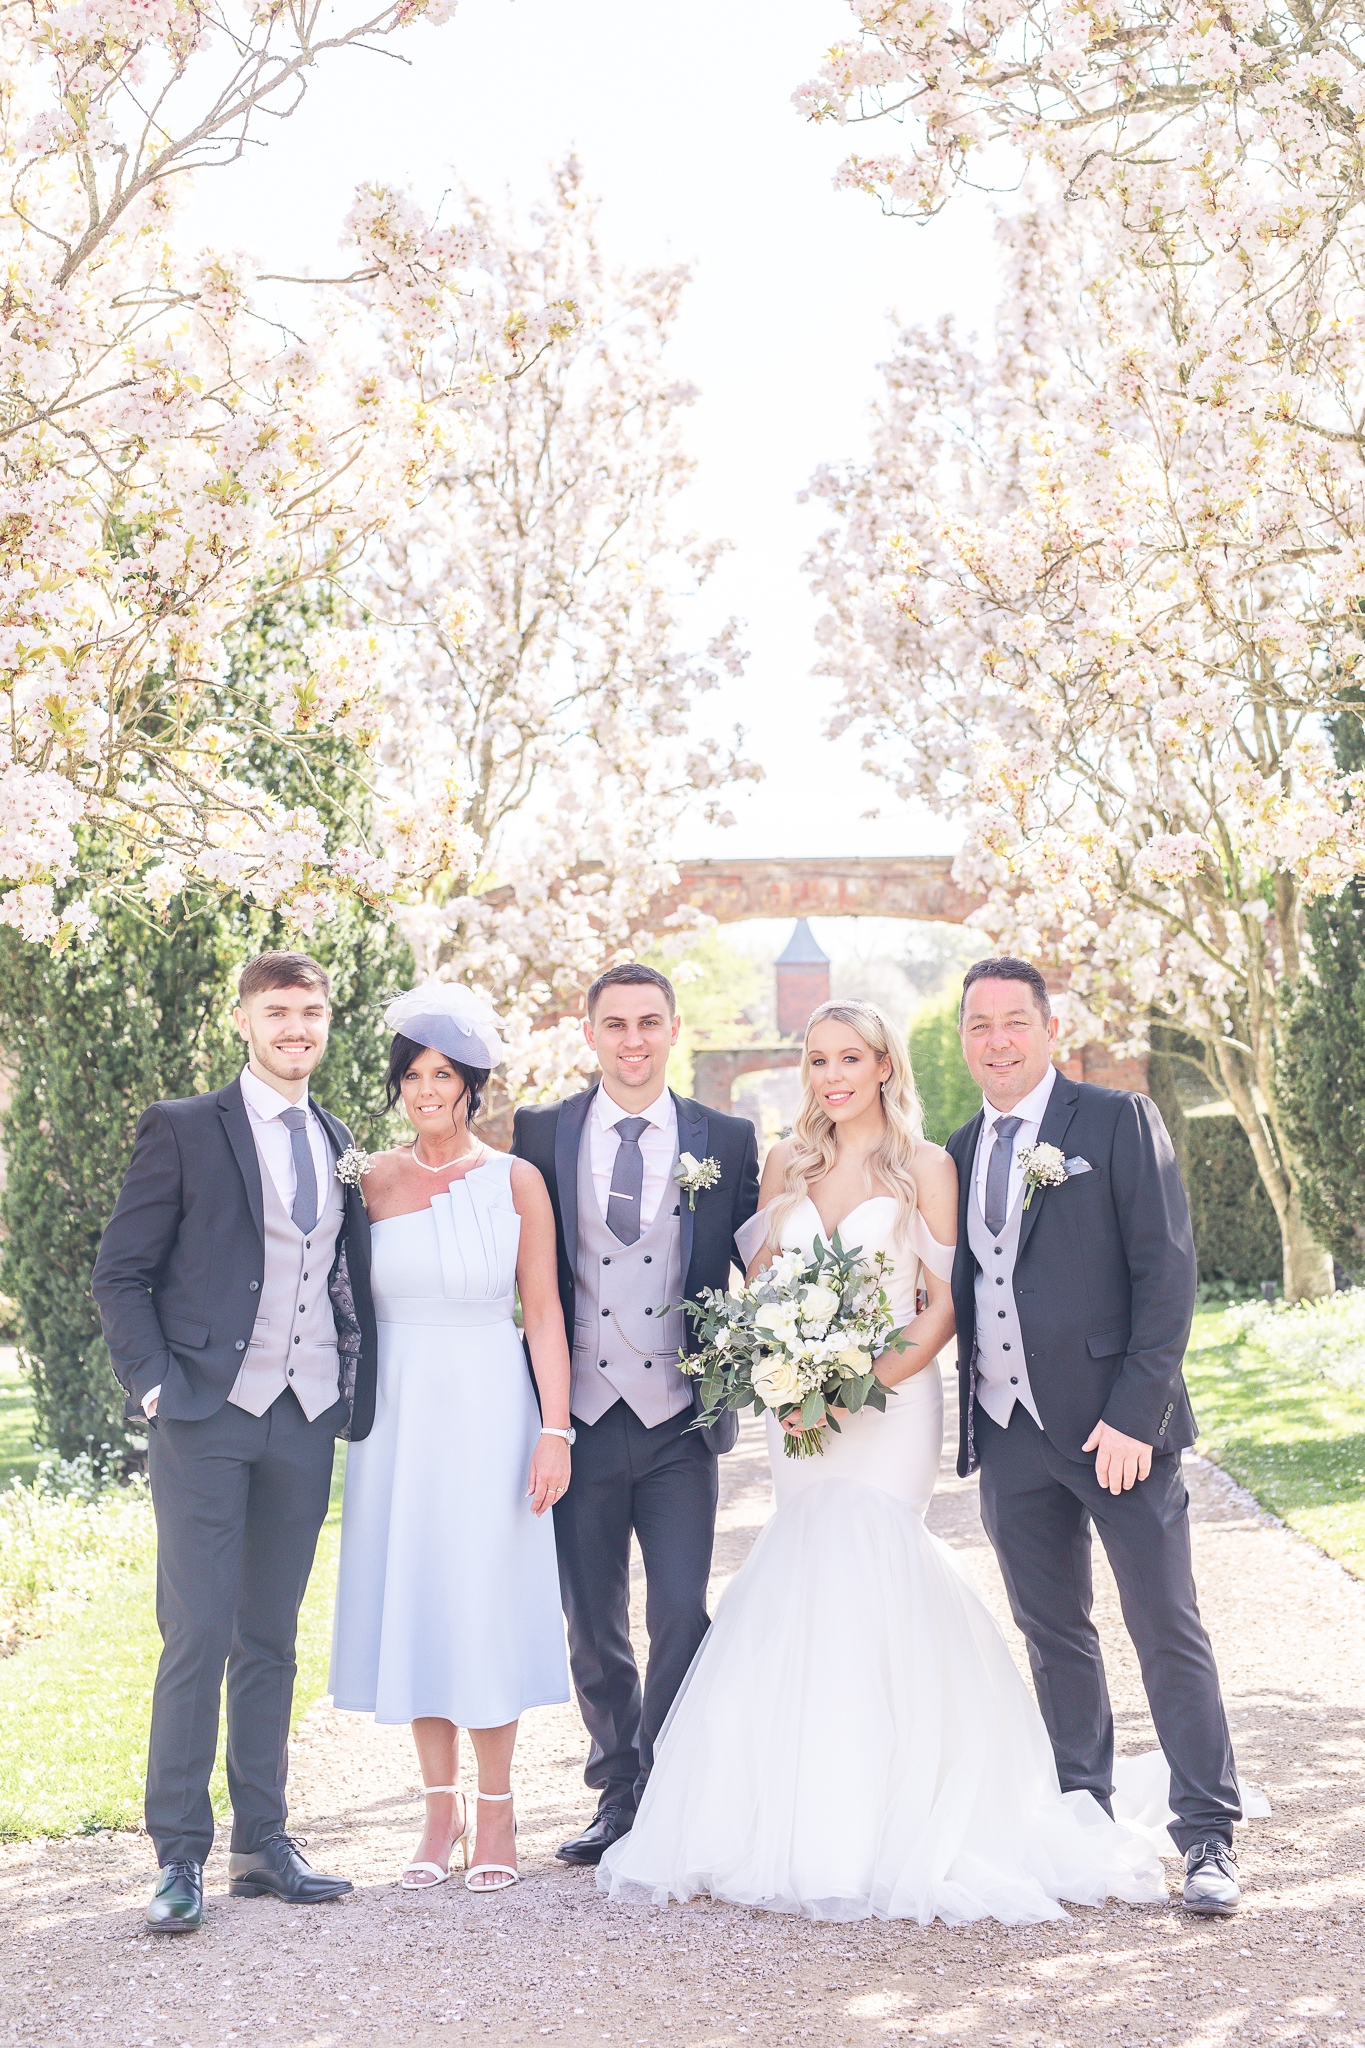 Family portraits in the gardens at Combermere Abbey, Cheshire wedding venue